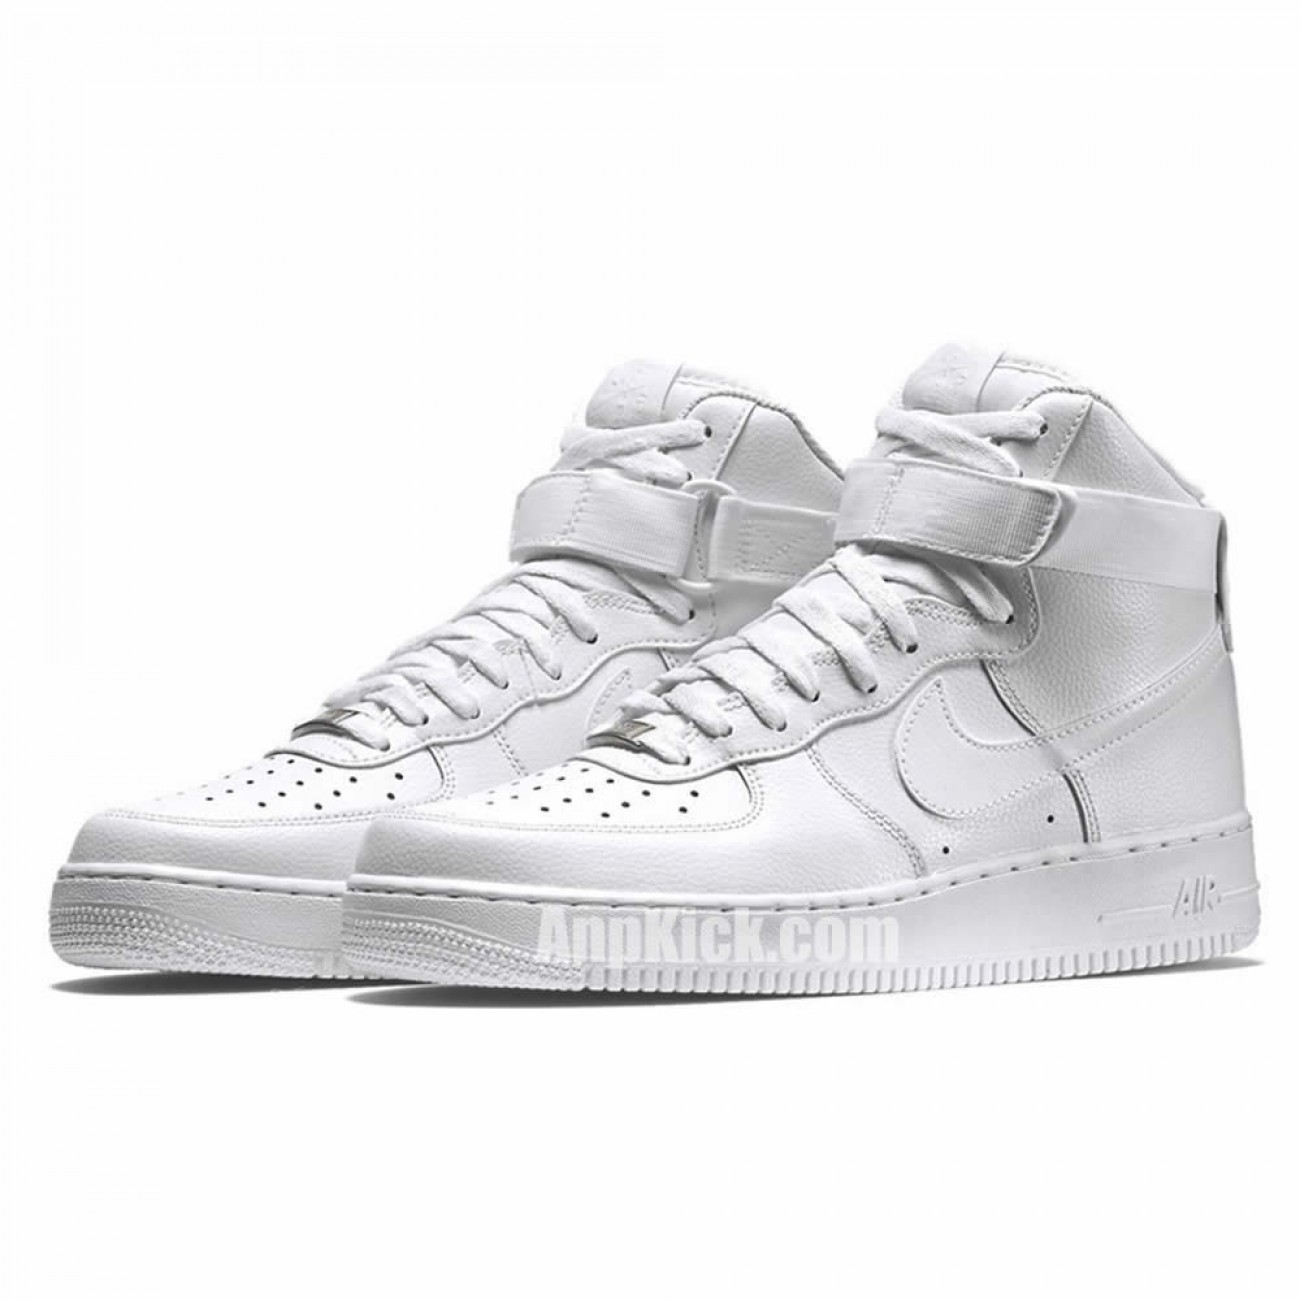 All White Air Force Ones 1 High '07 AF1 Outlet Shoes 315121-115